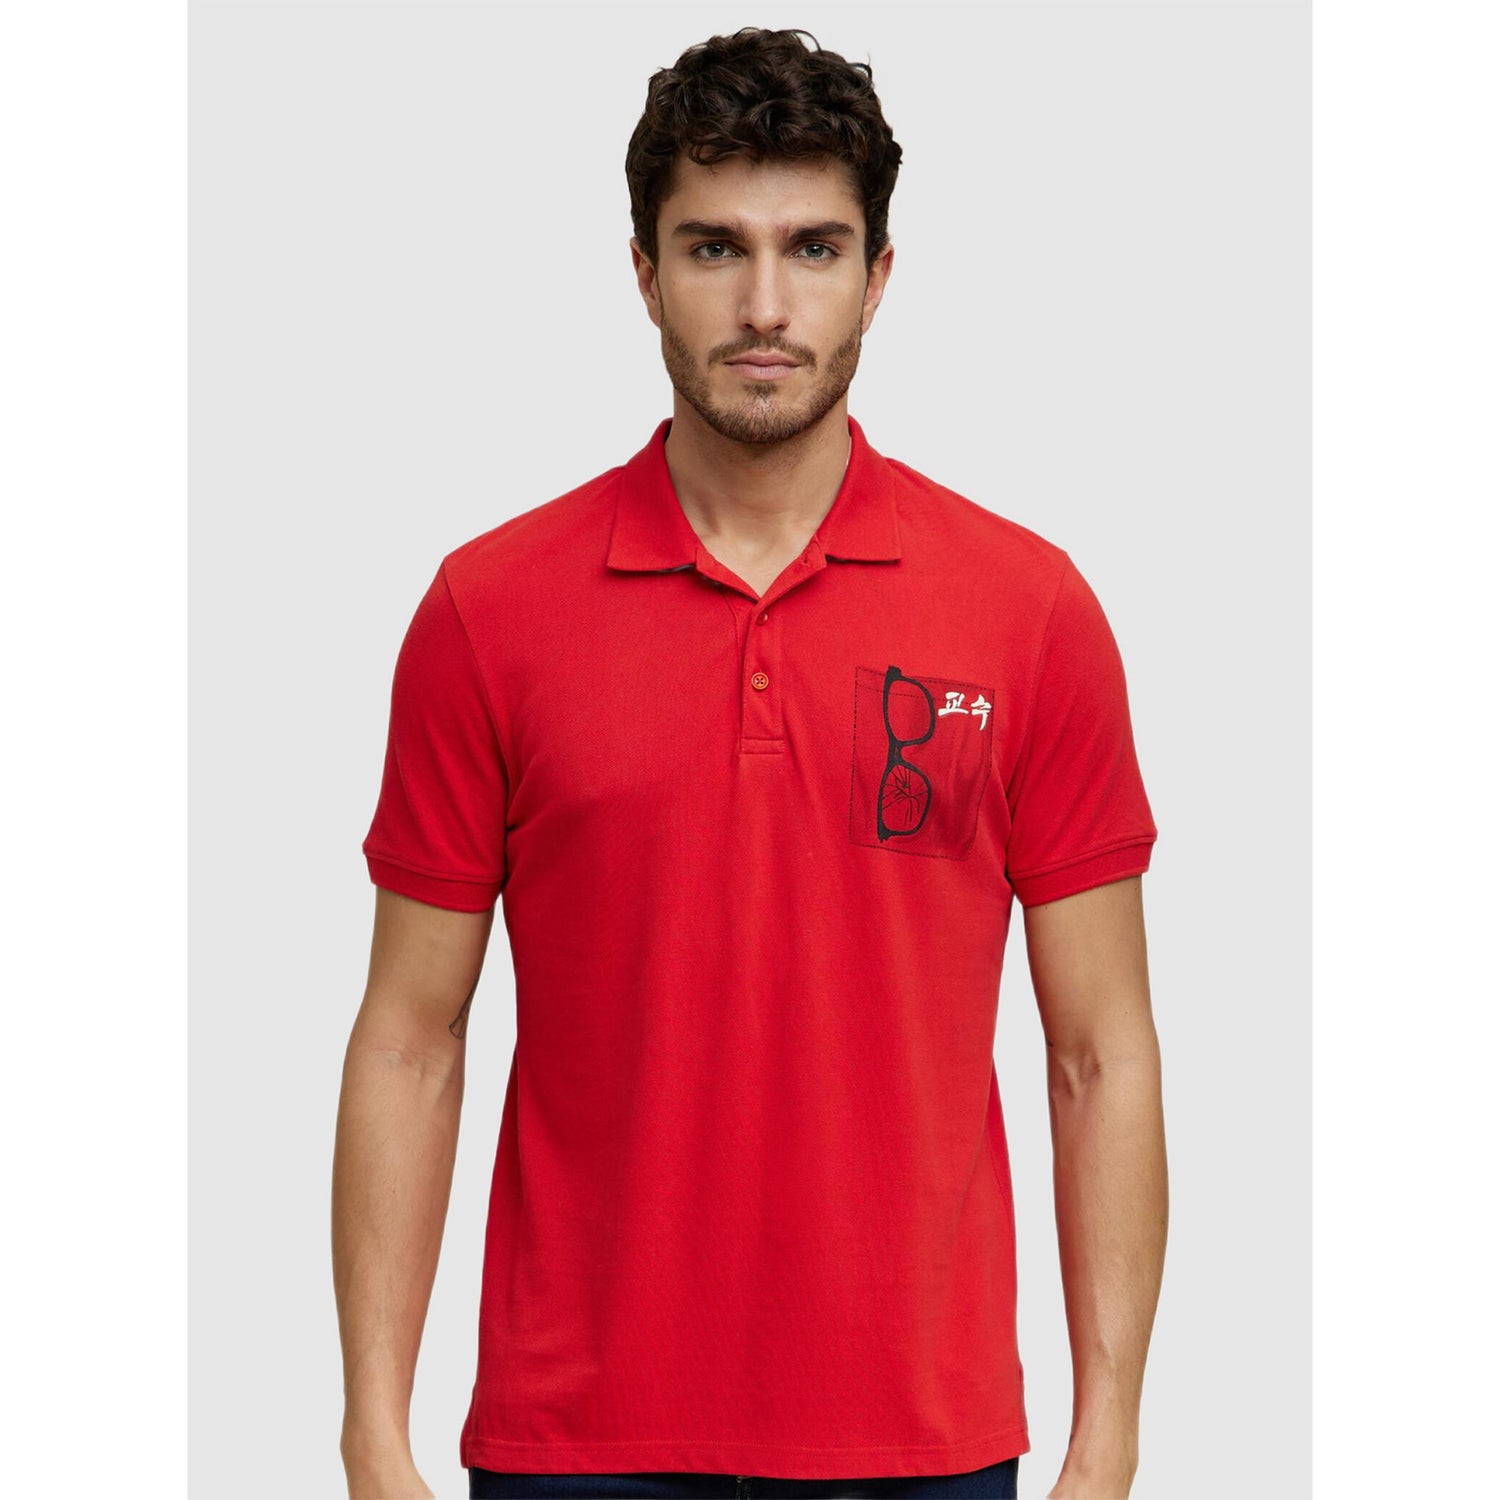 Money Heist - Red Printed Polo Collar Cotton T-shirt (LBEMHKP1)